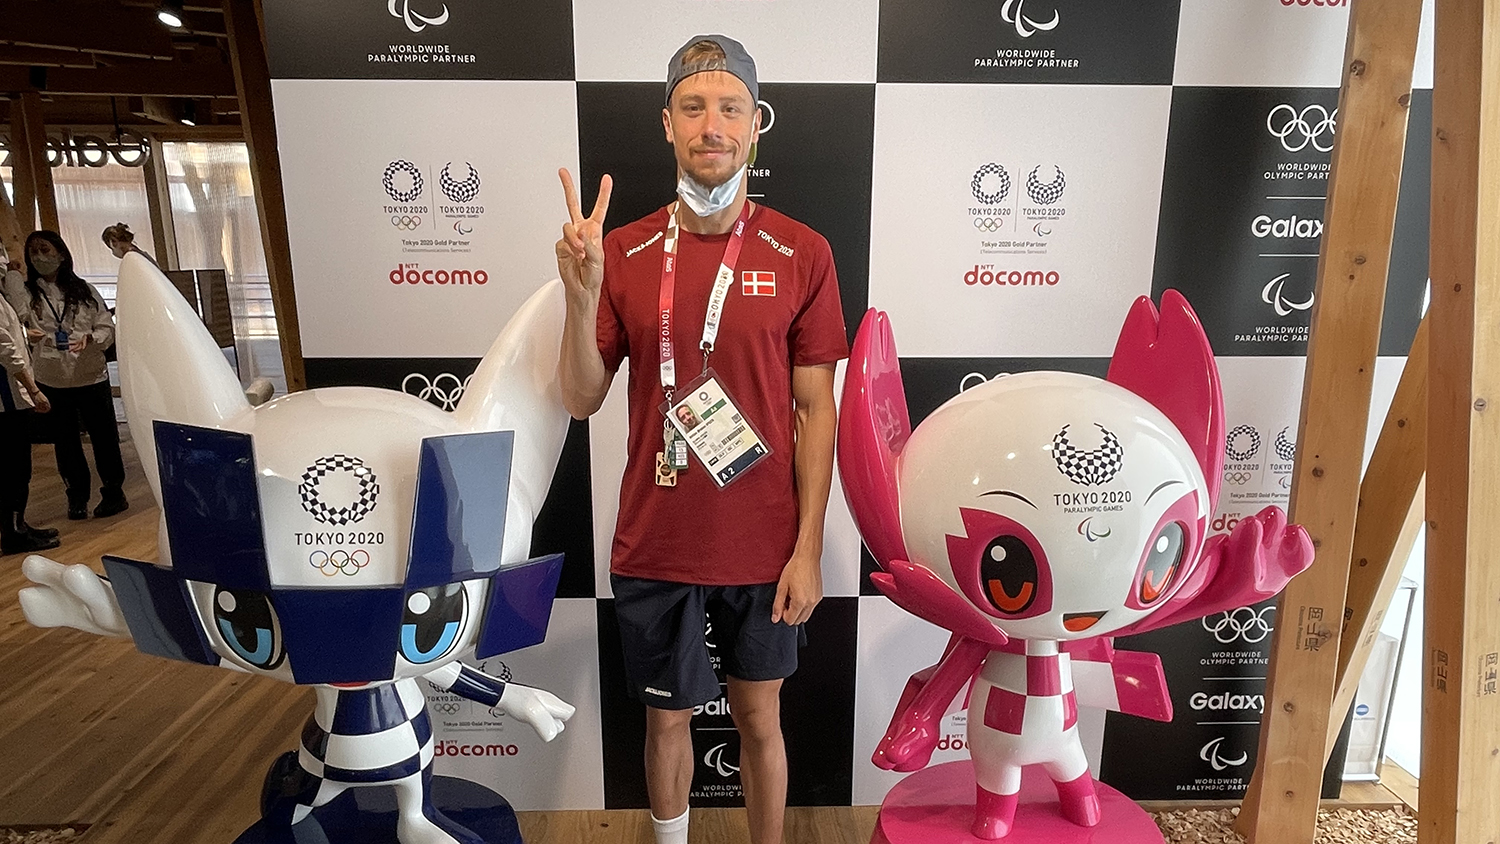 Anton Ipsen at the 2021 Olympic Games standing in behind two cartoon figures.